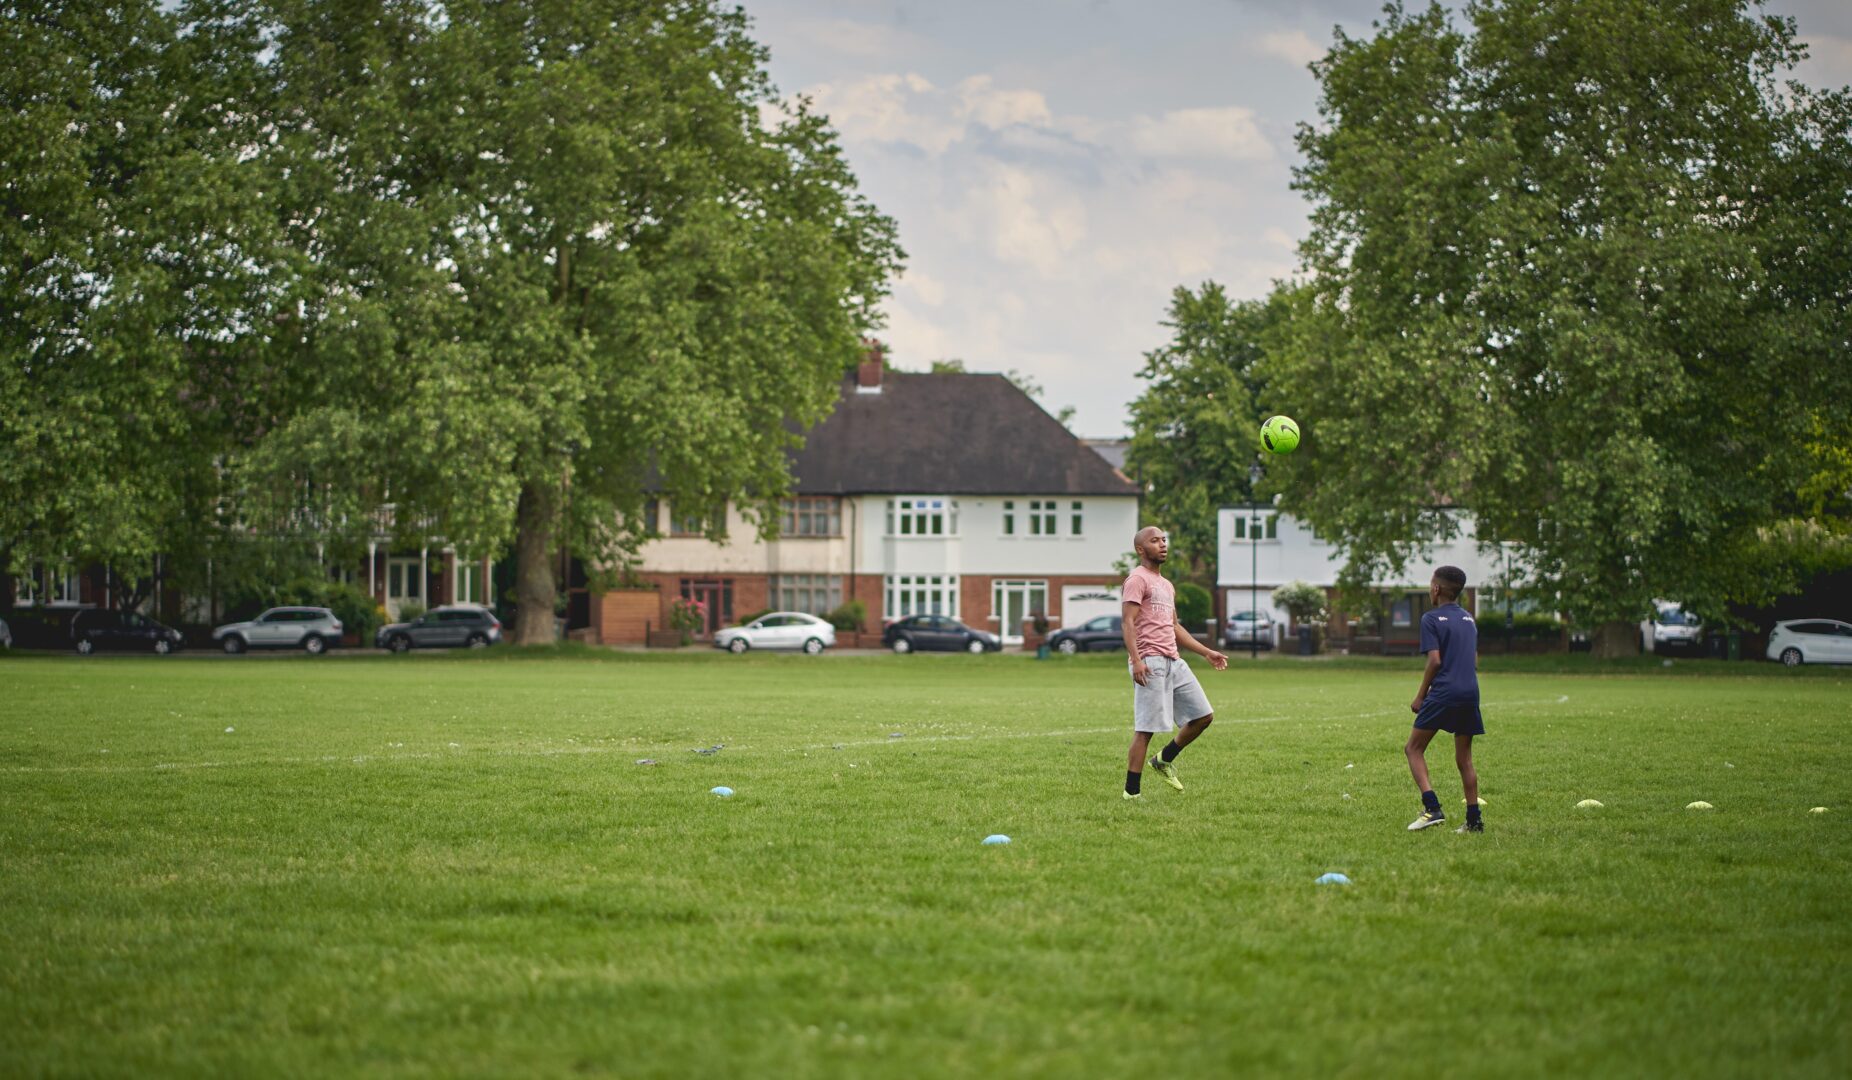 Two people playing football in a local green space